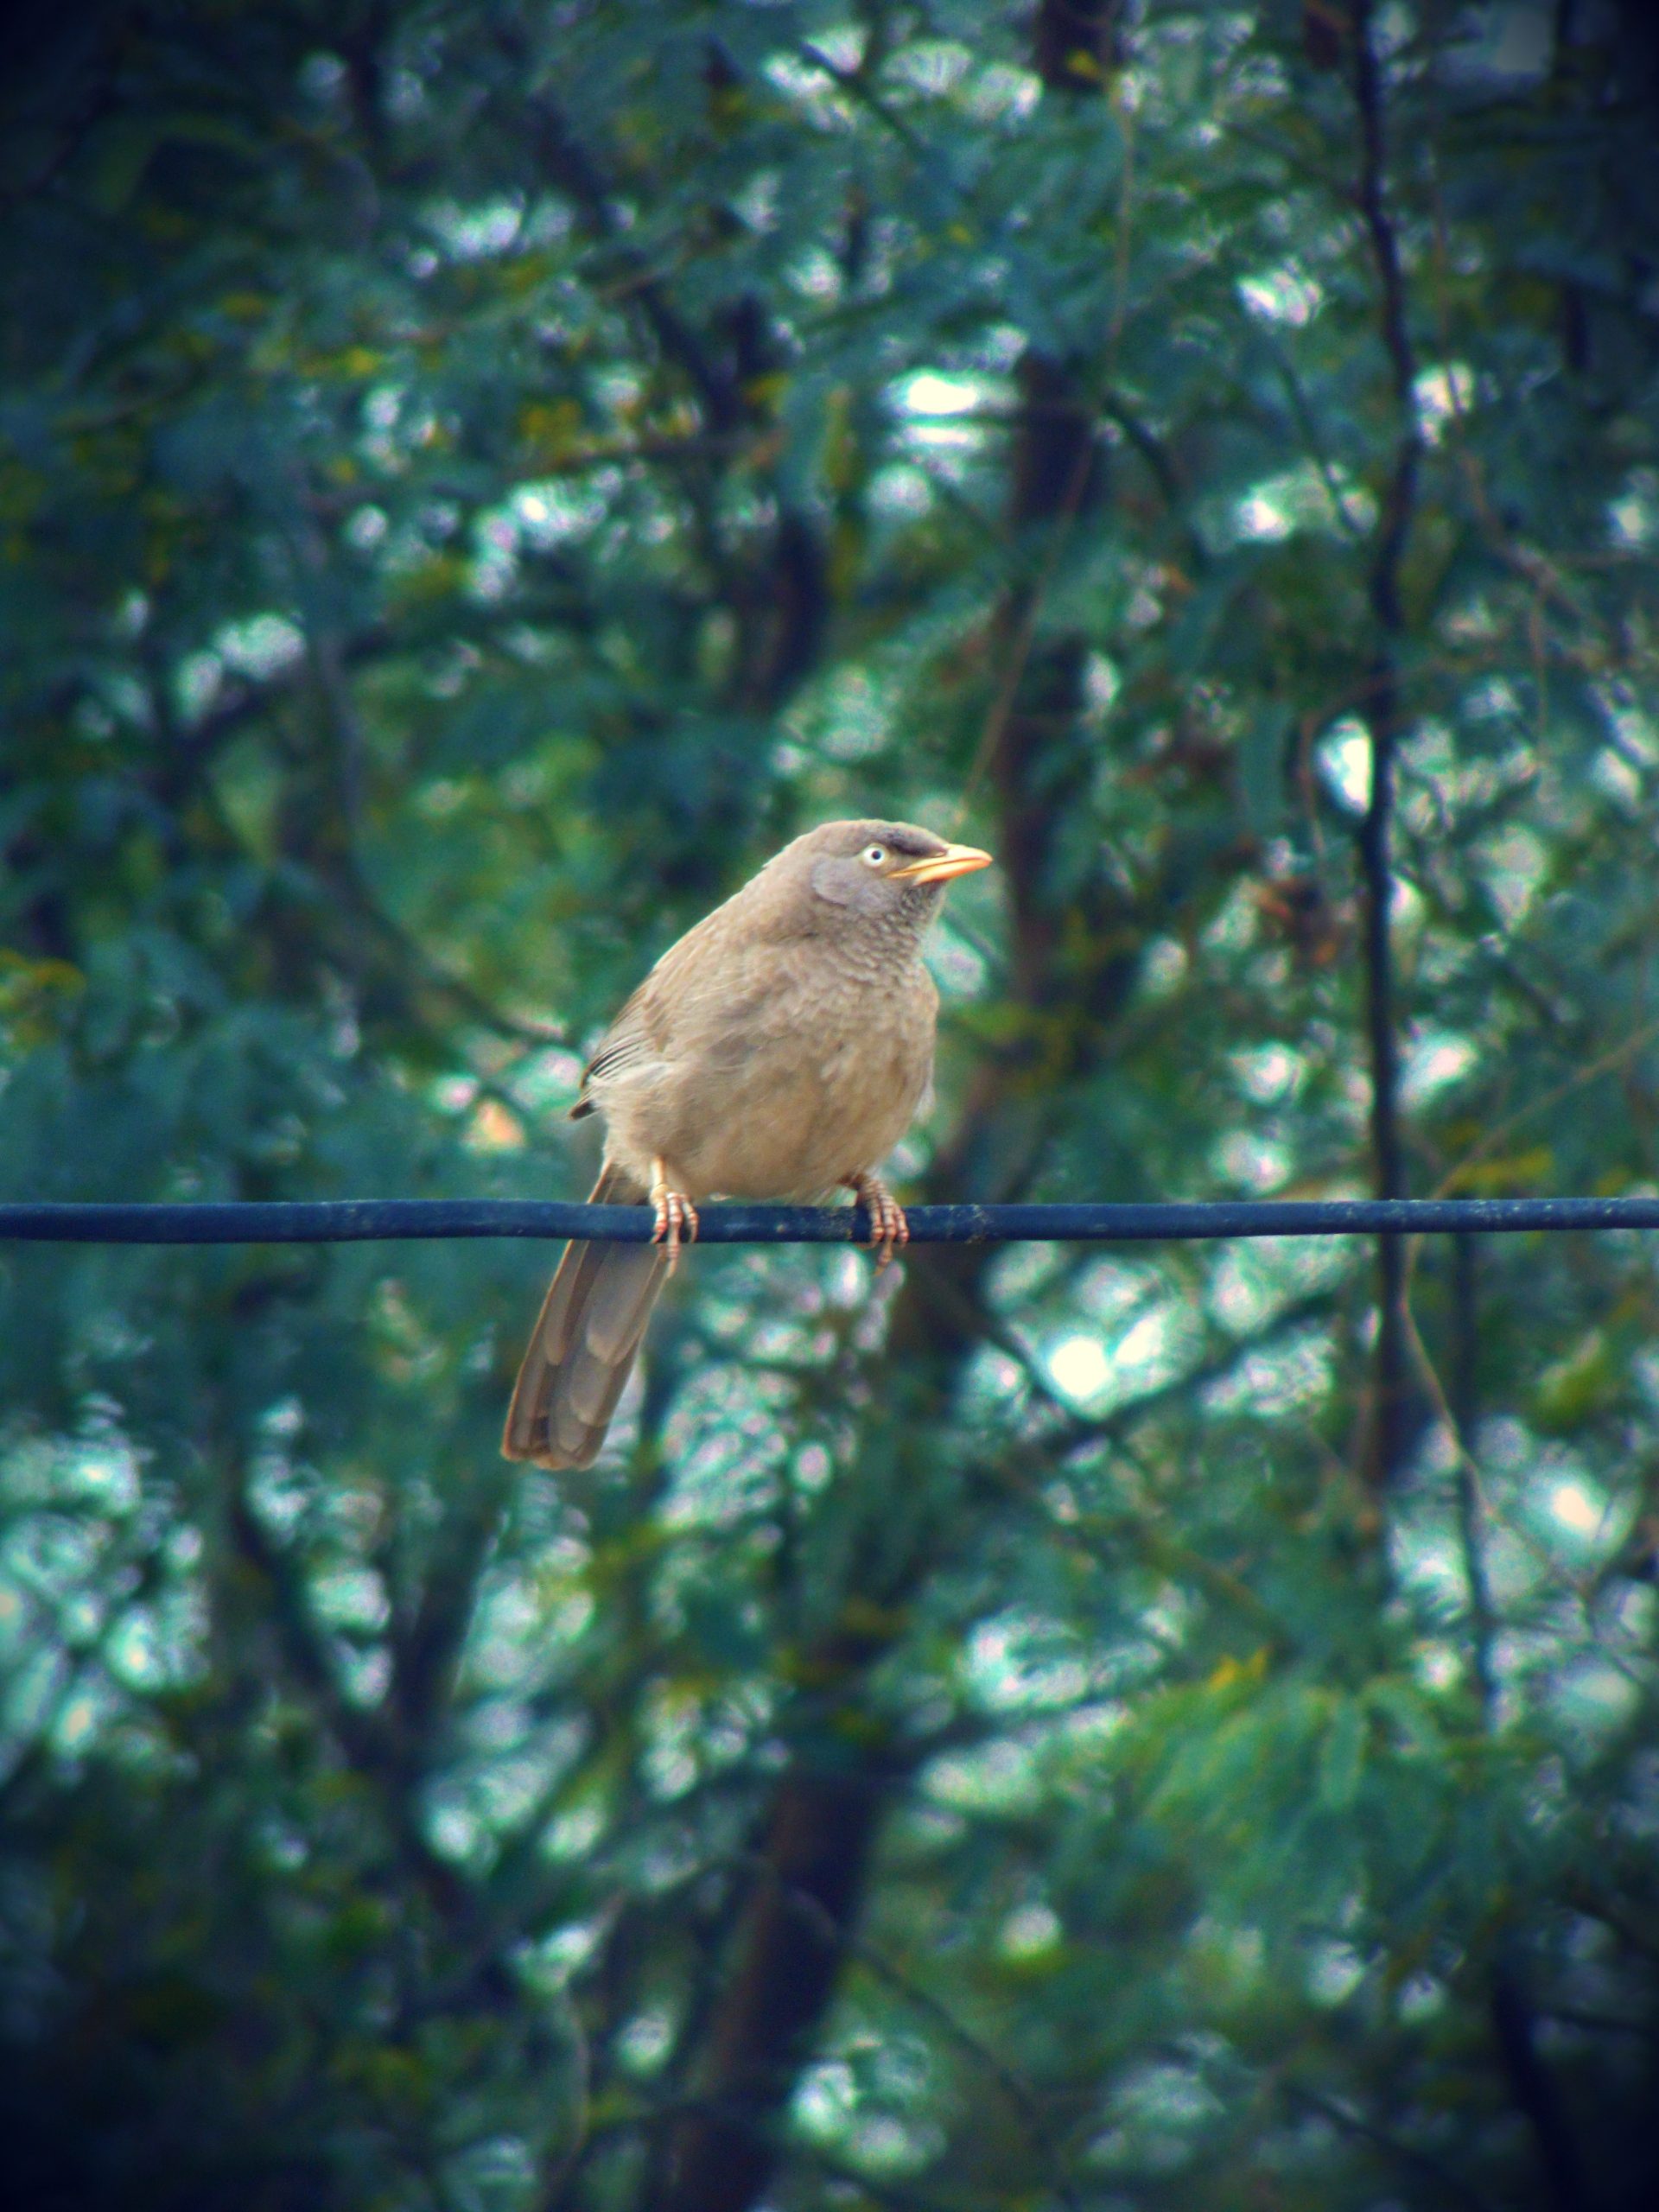 Bird on wire cable